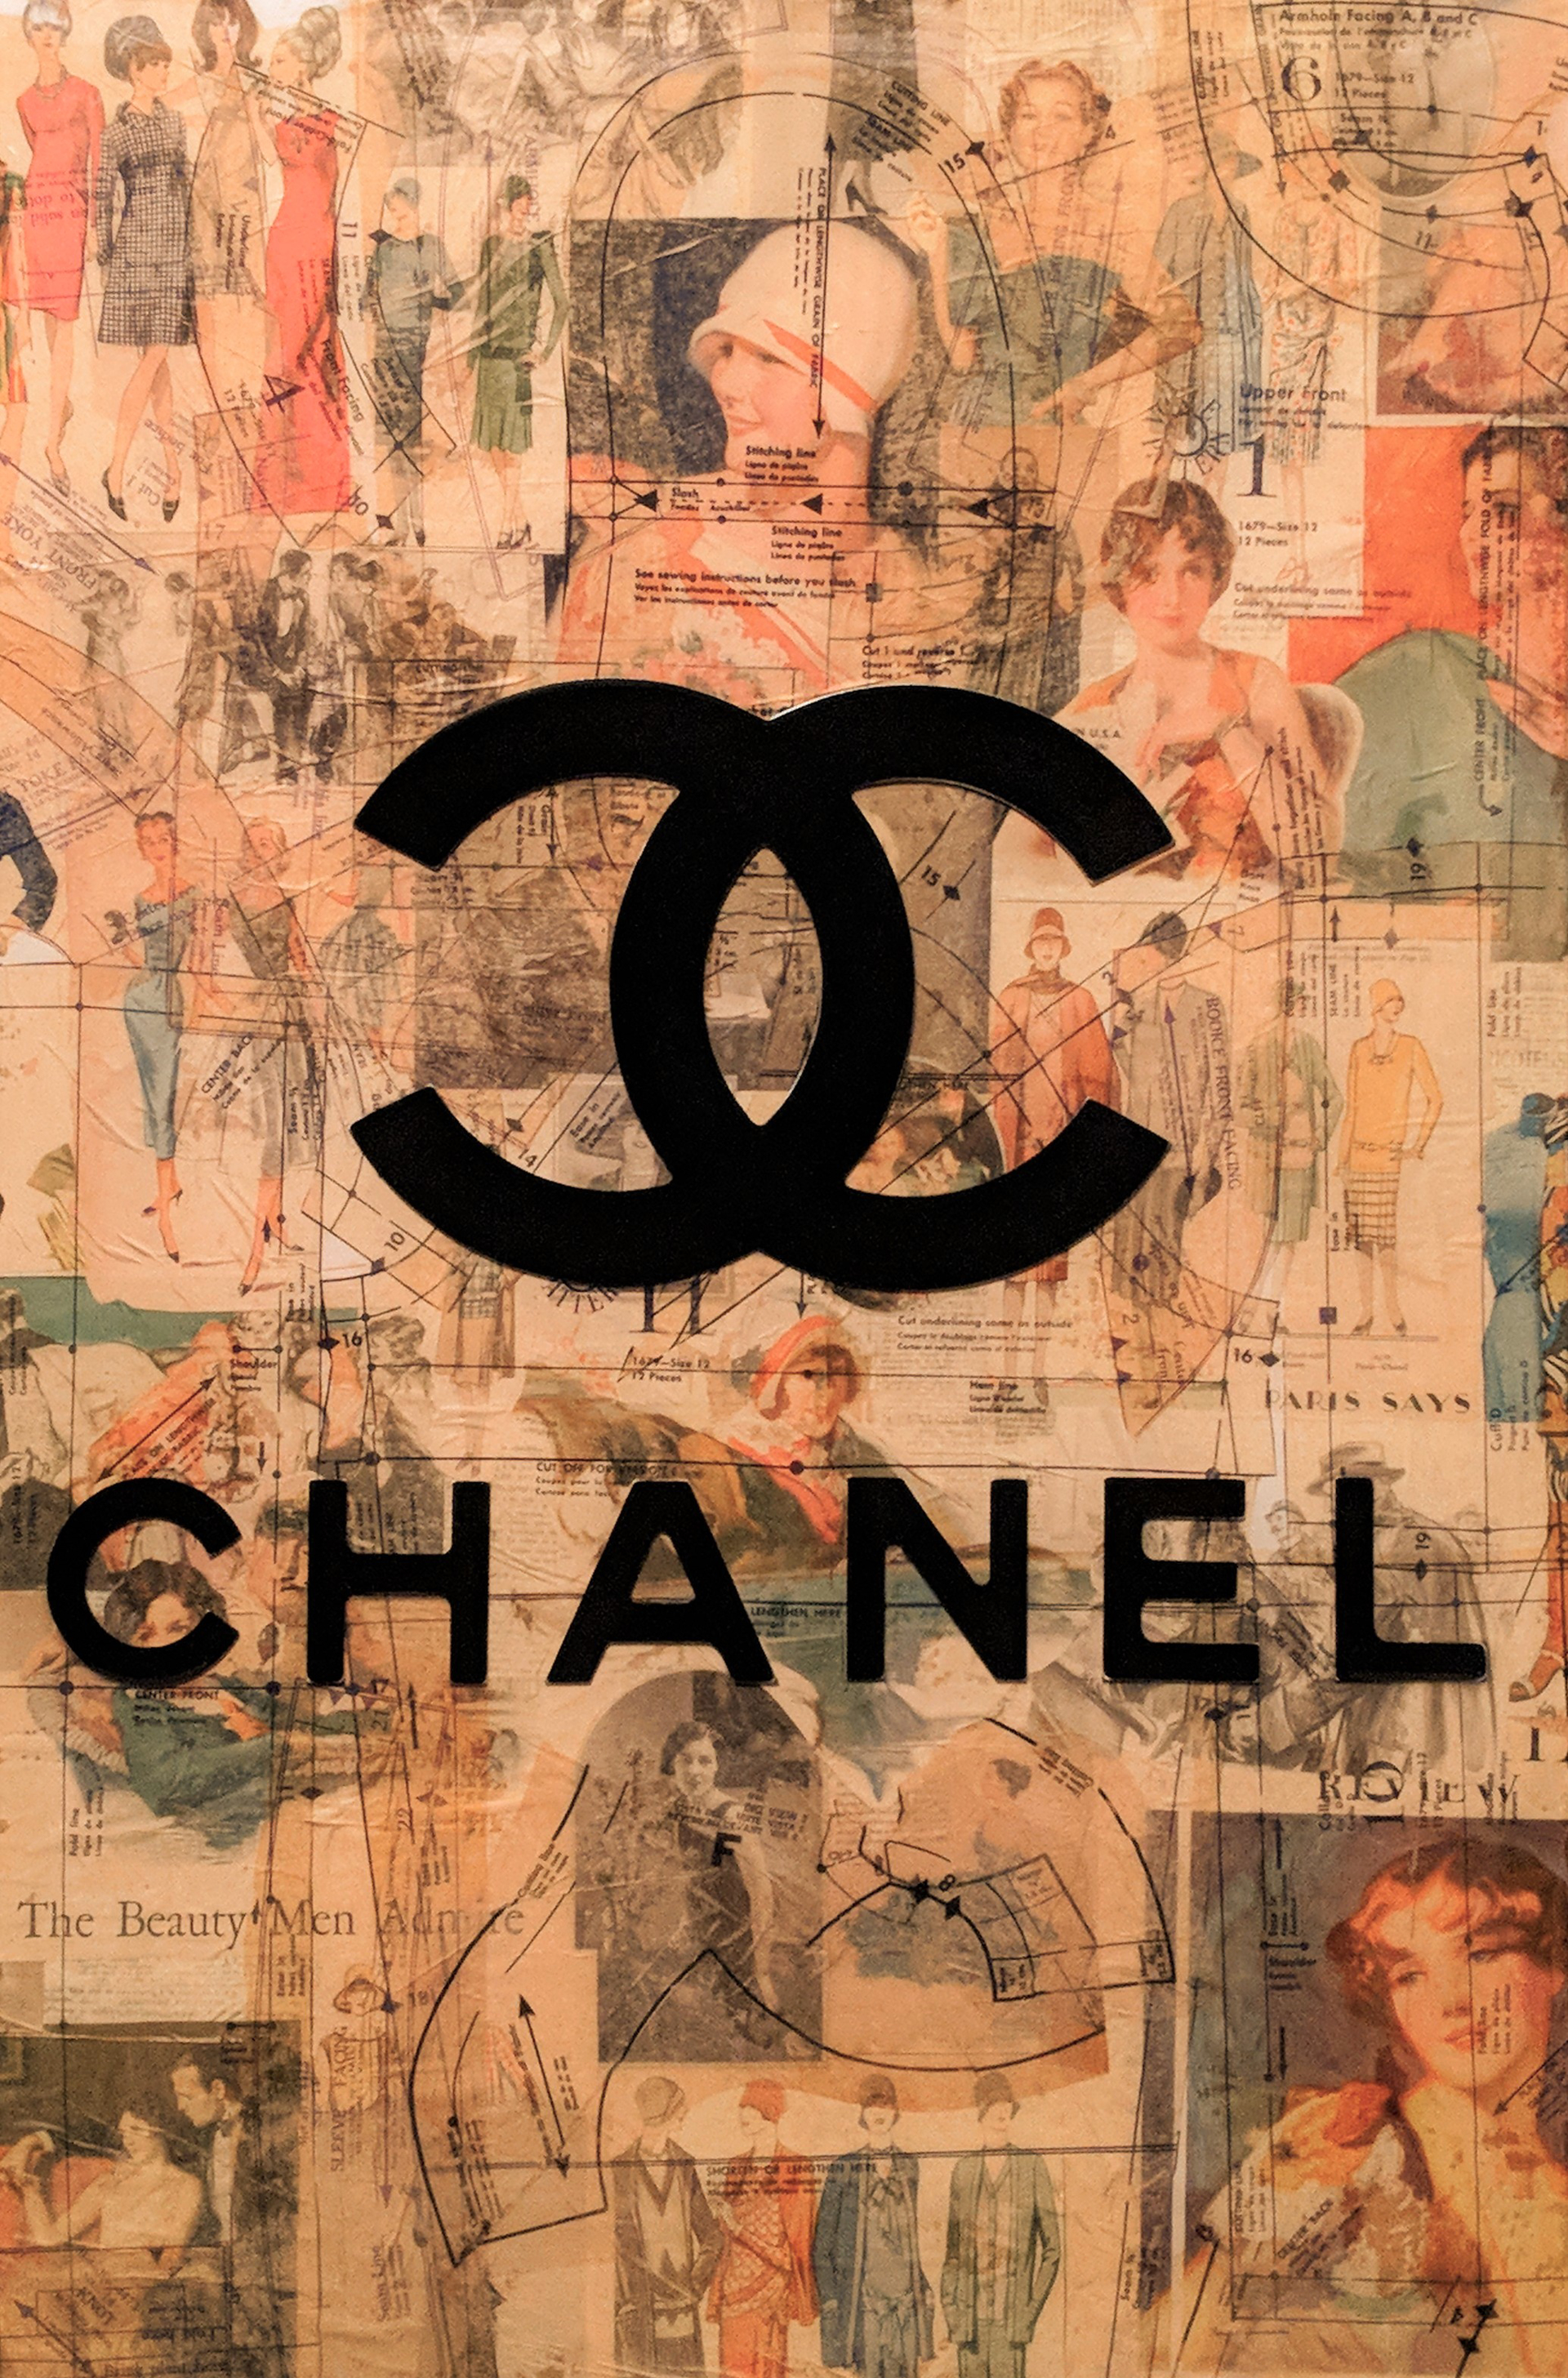 Chanel No. 1 by John Quigley